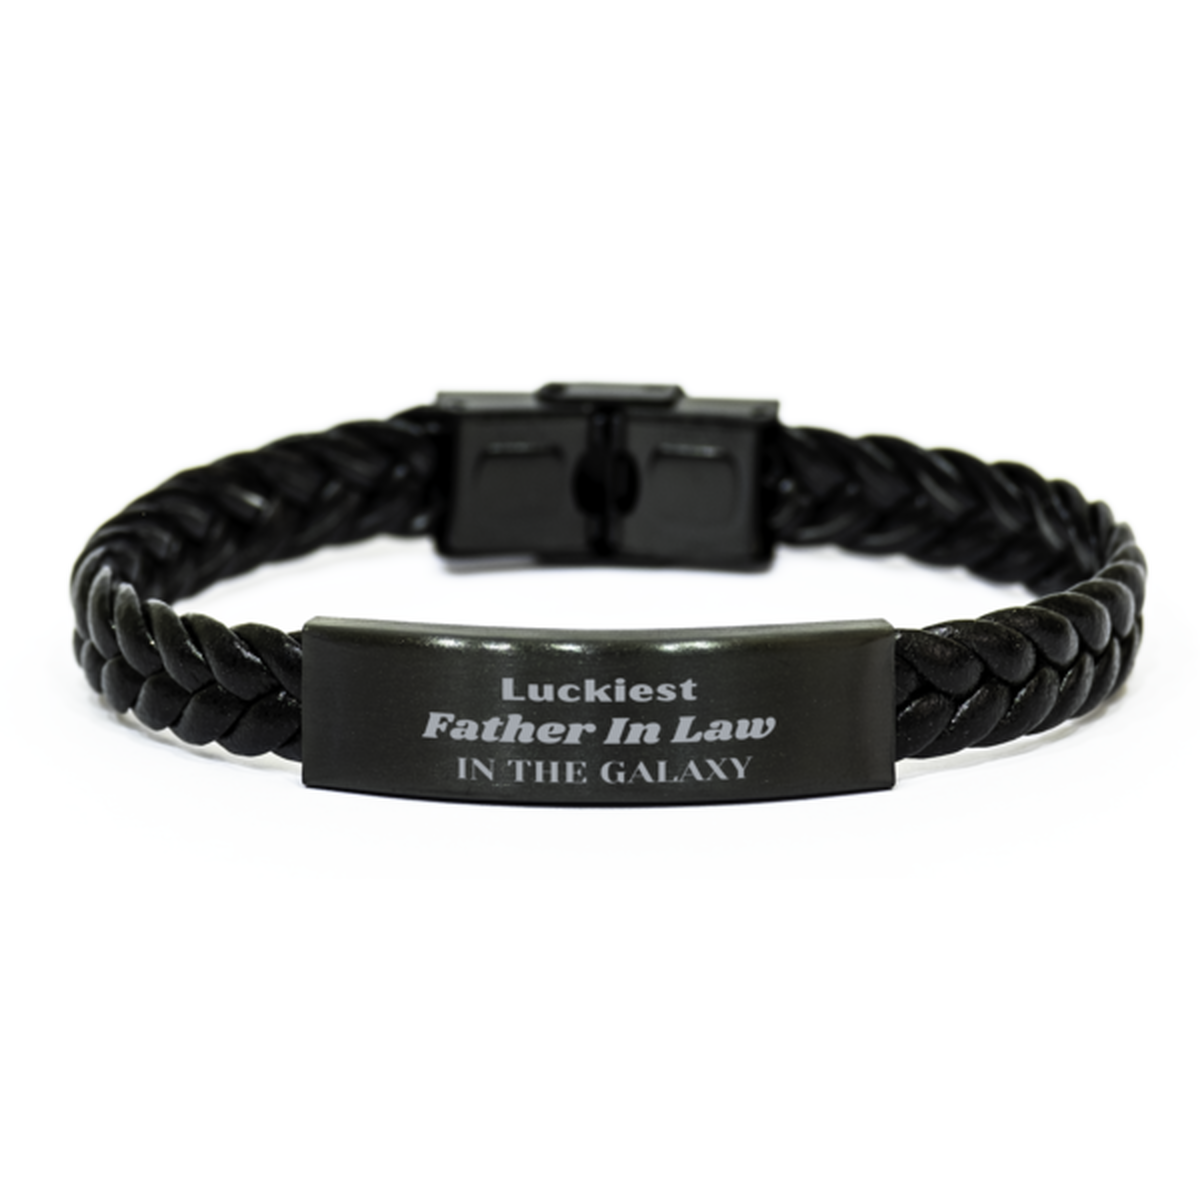 Luckiest Father In Law in the Galaxy, To My Father In Law Engraved Gifts, Christmas Father In Law Braided Leather Bracelet Gifts, X-mas Birthday Unique Gifts For Father In Law Men Women